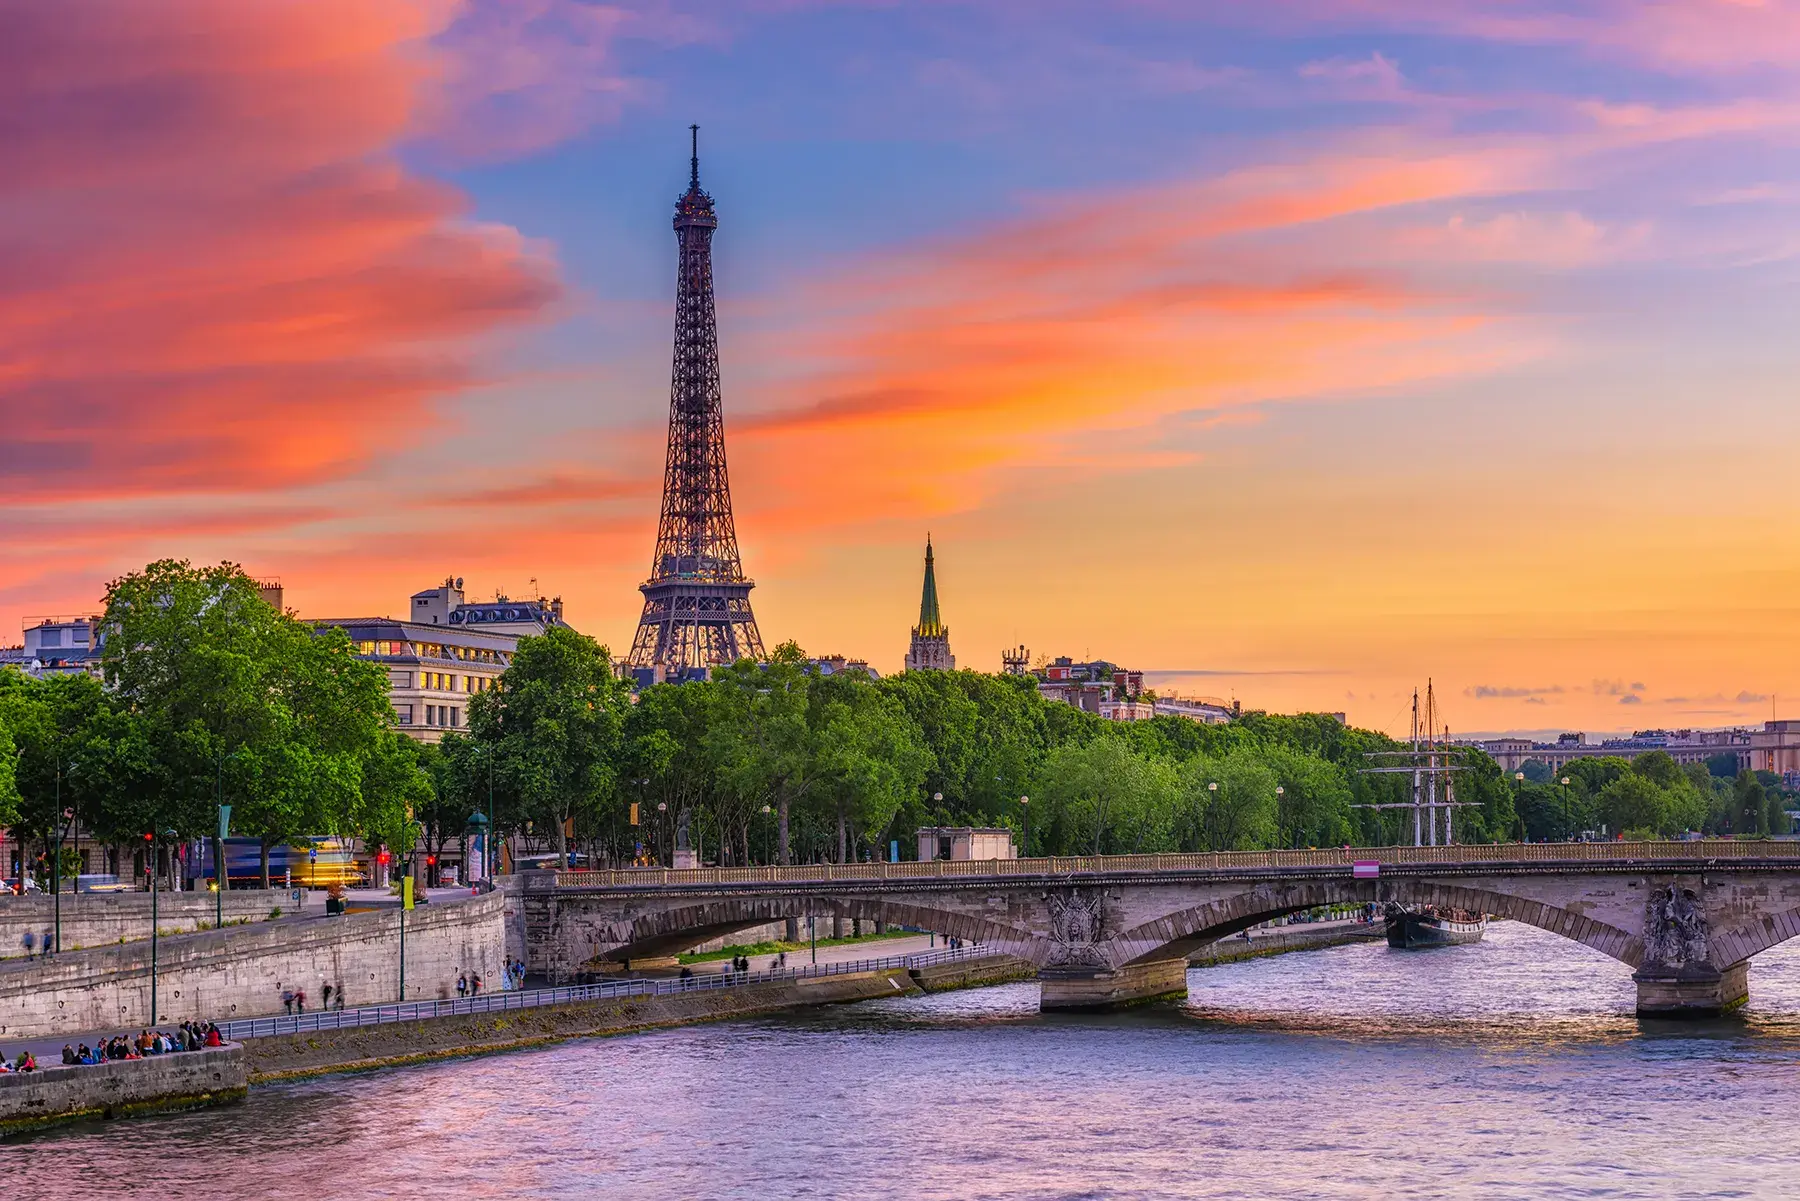 Paris and the Eiffel Tower at sunset